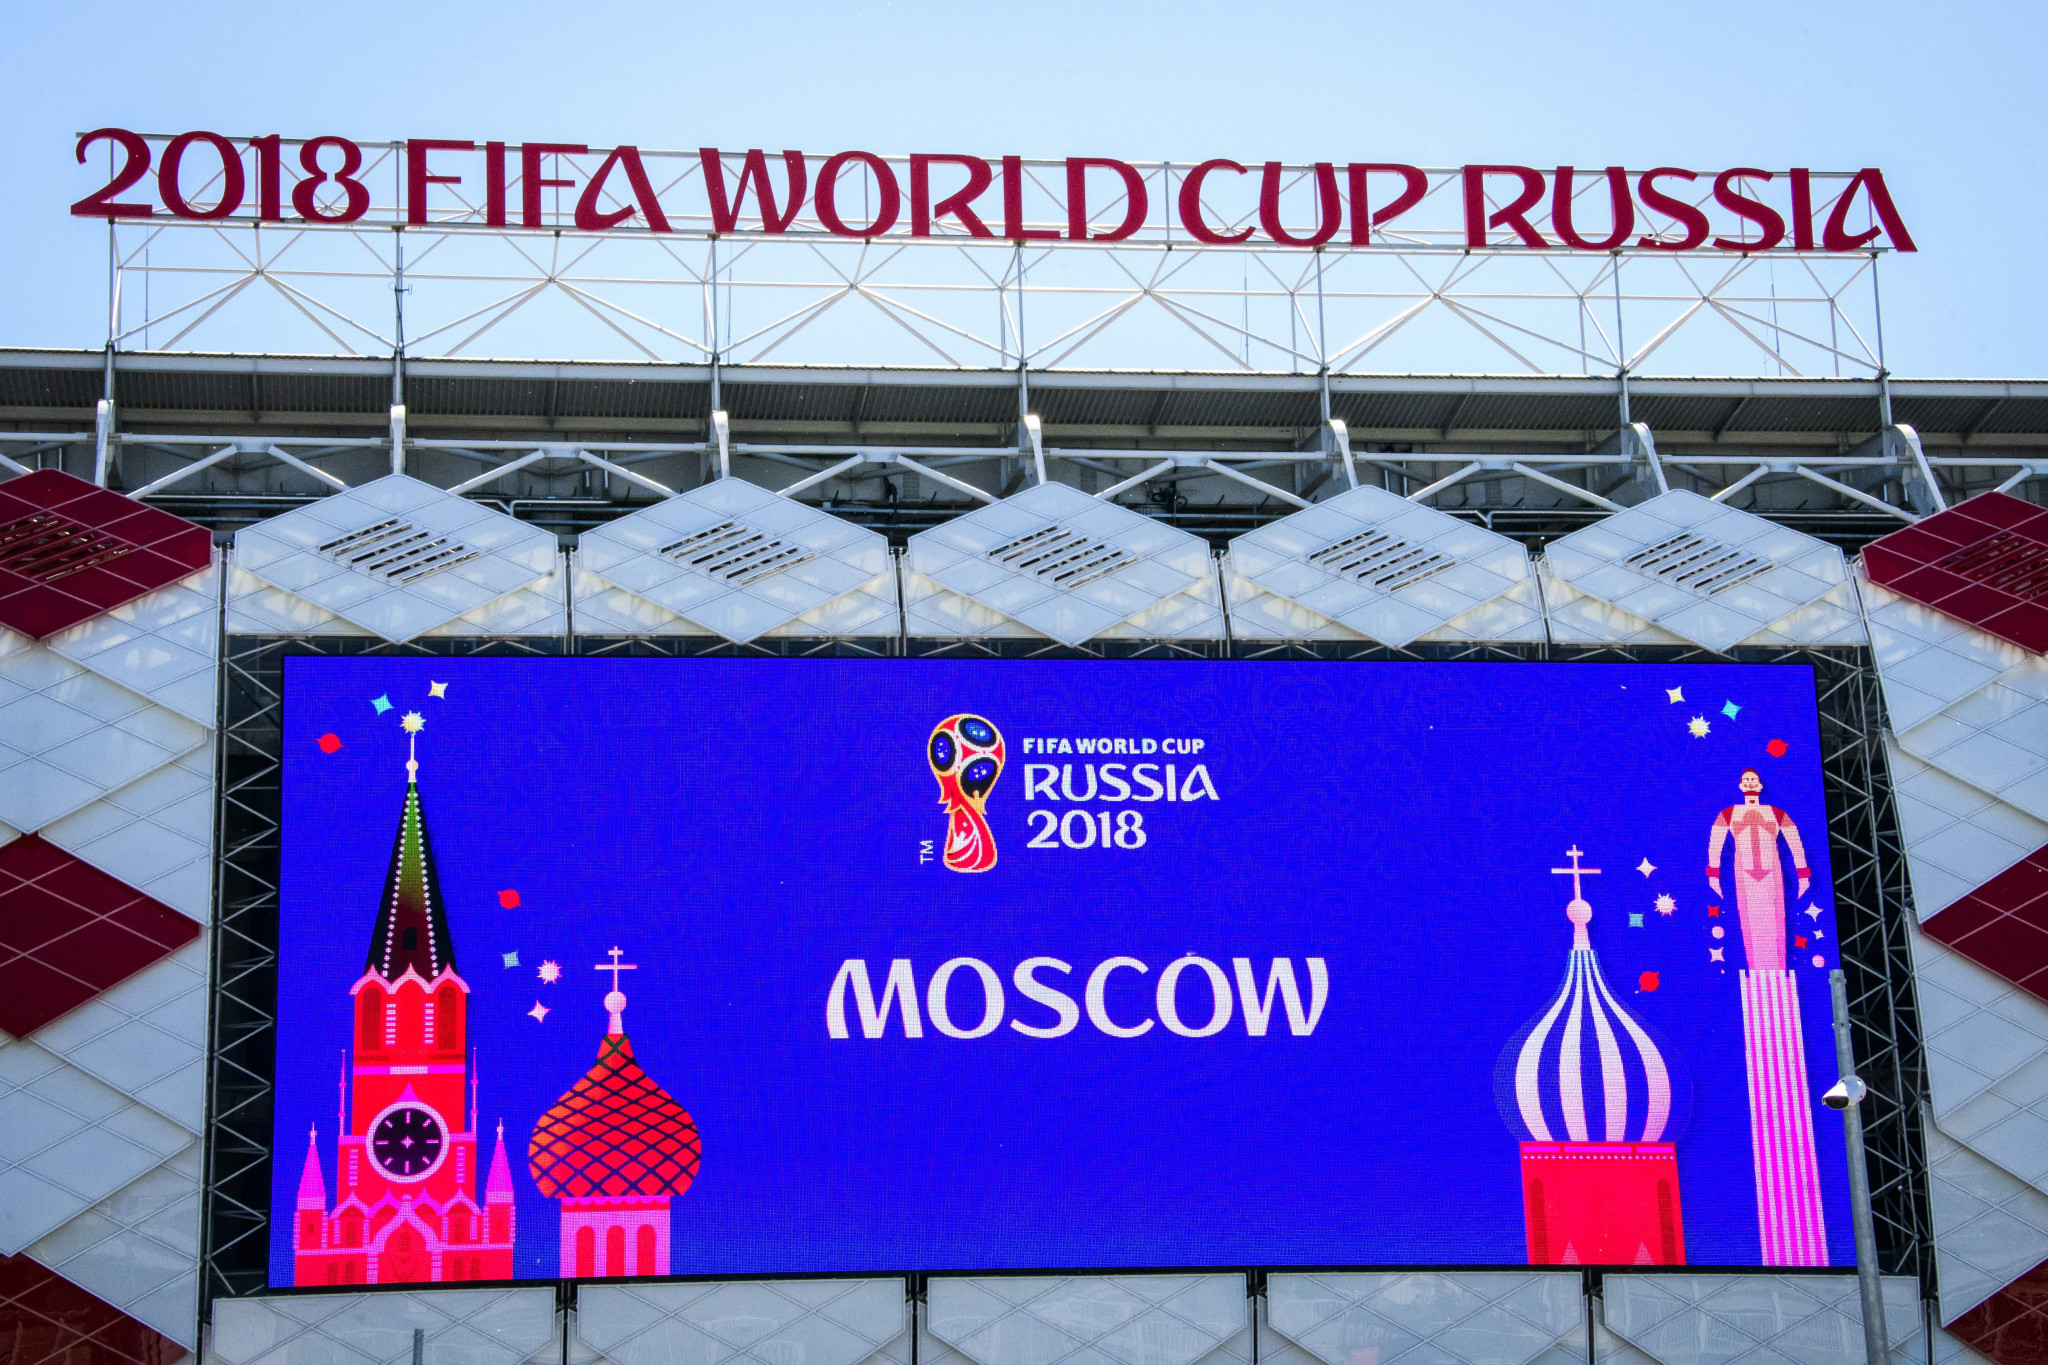 FIFA claim all doping tests before and during Russia 2018 World Cup have been negative